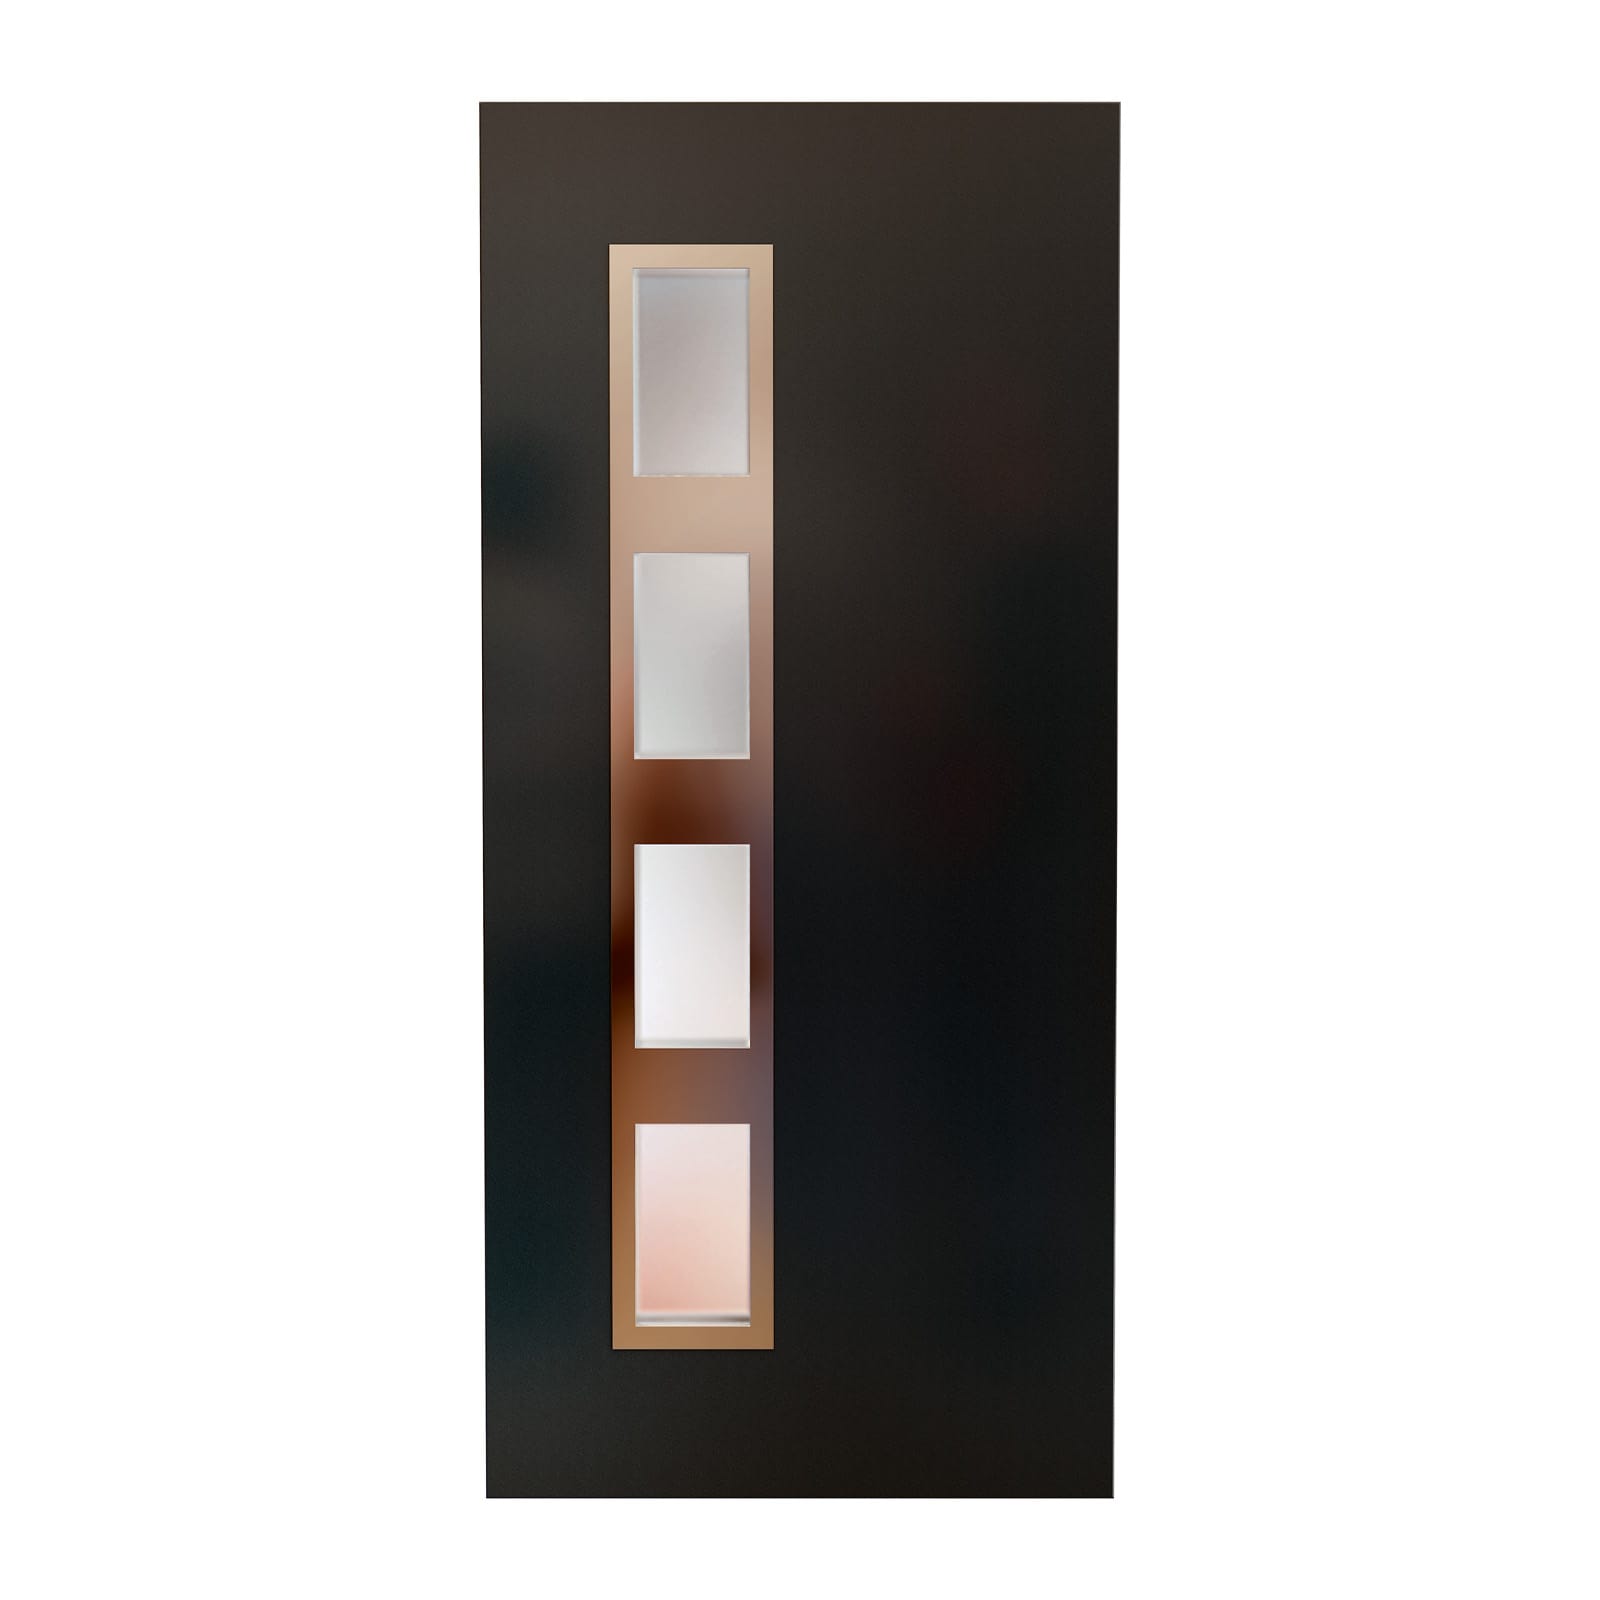 Alitherm 400 Door with PM0003T panel